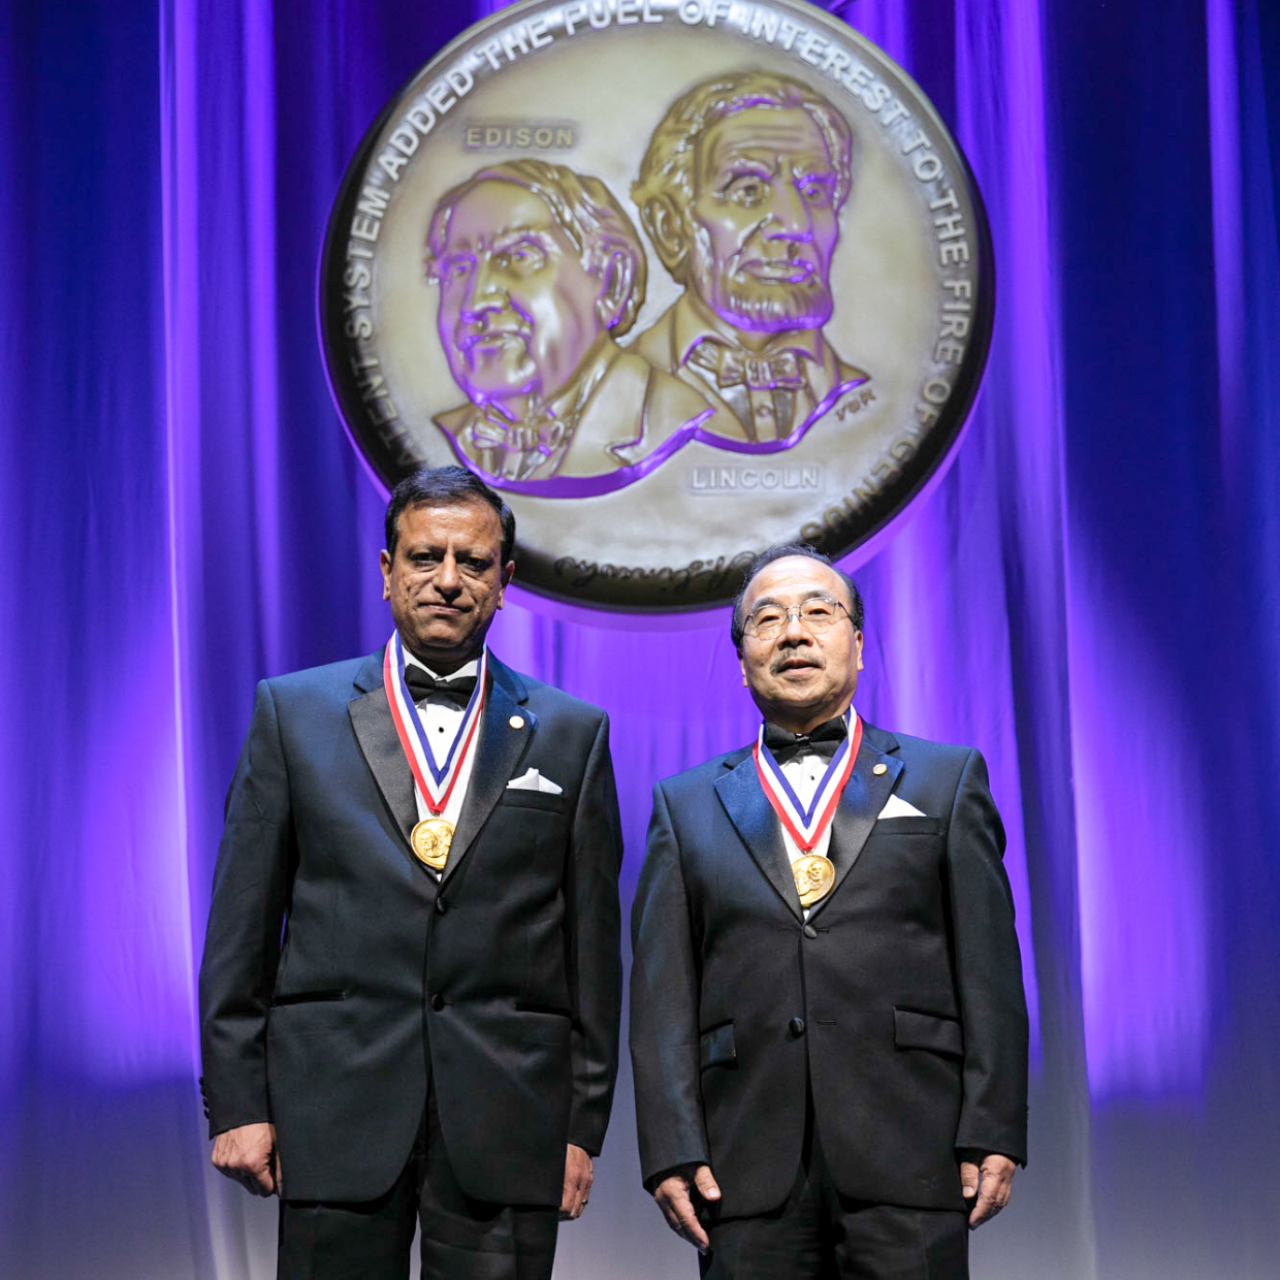 Pushkar Tandon, left, and Ming-Jun Li were inducted into the National Inventors Hall of Fame for their development of bendable optical fiber that brought high speed access to homes and data centers.